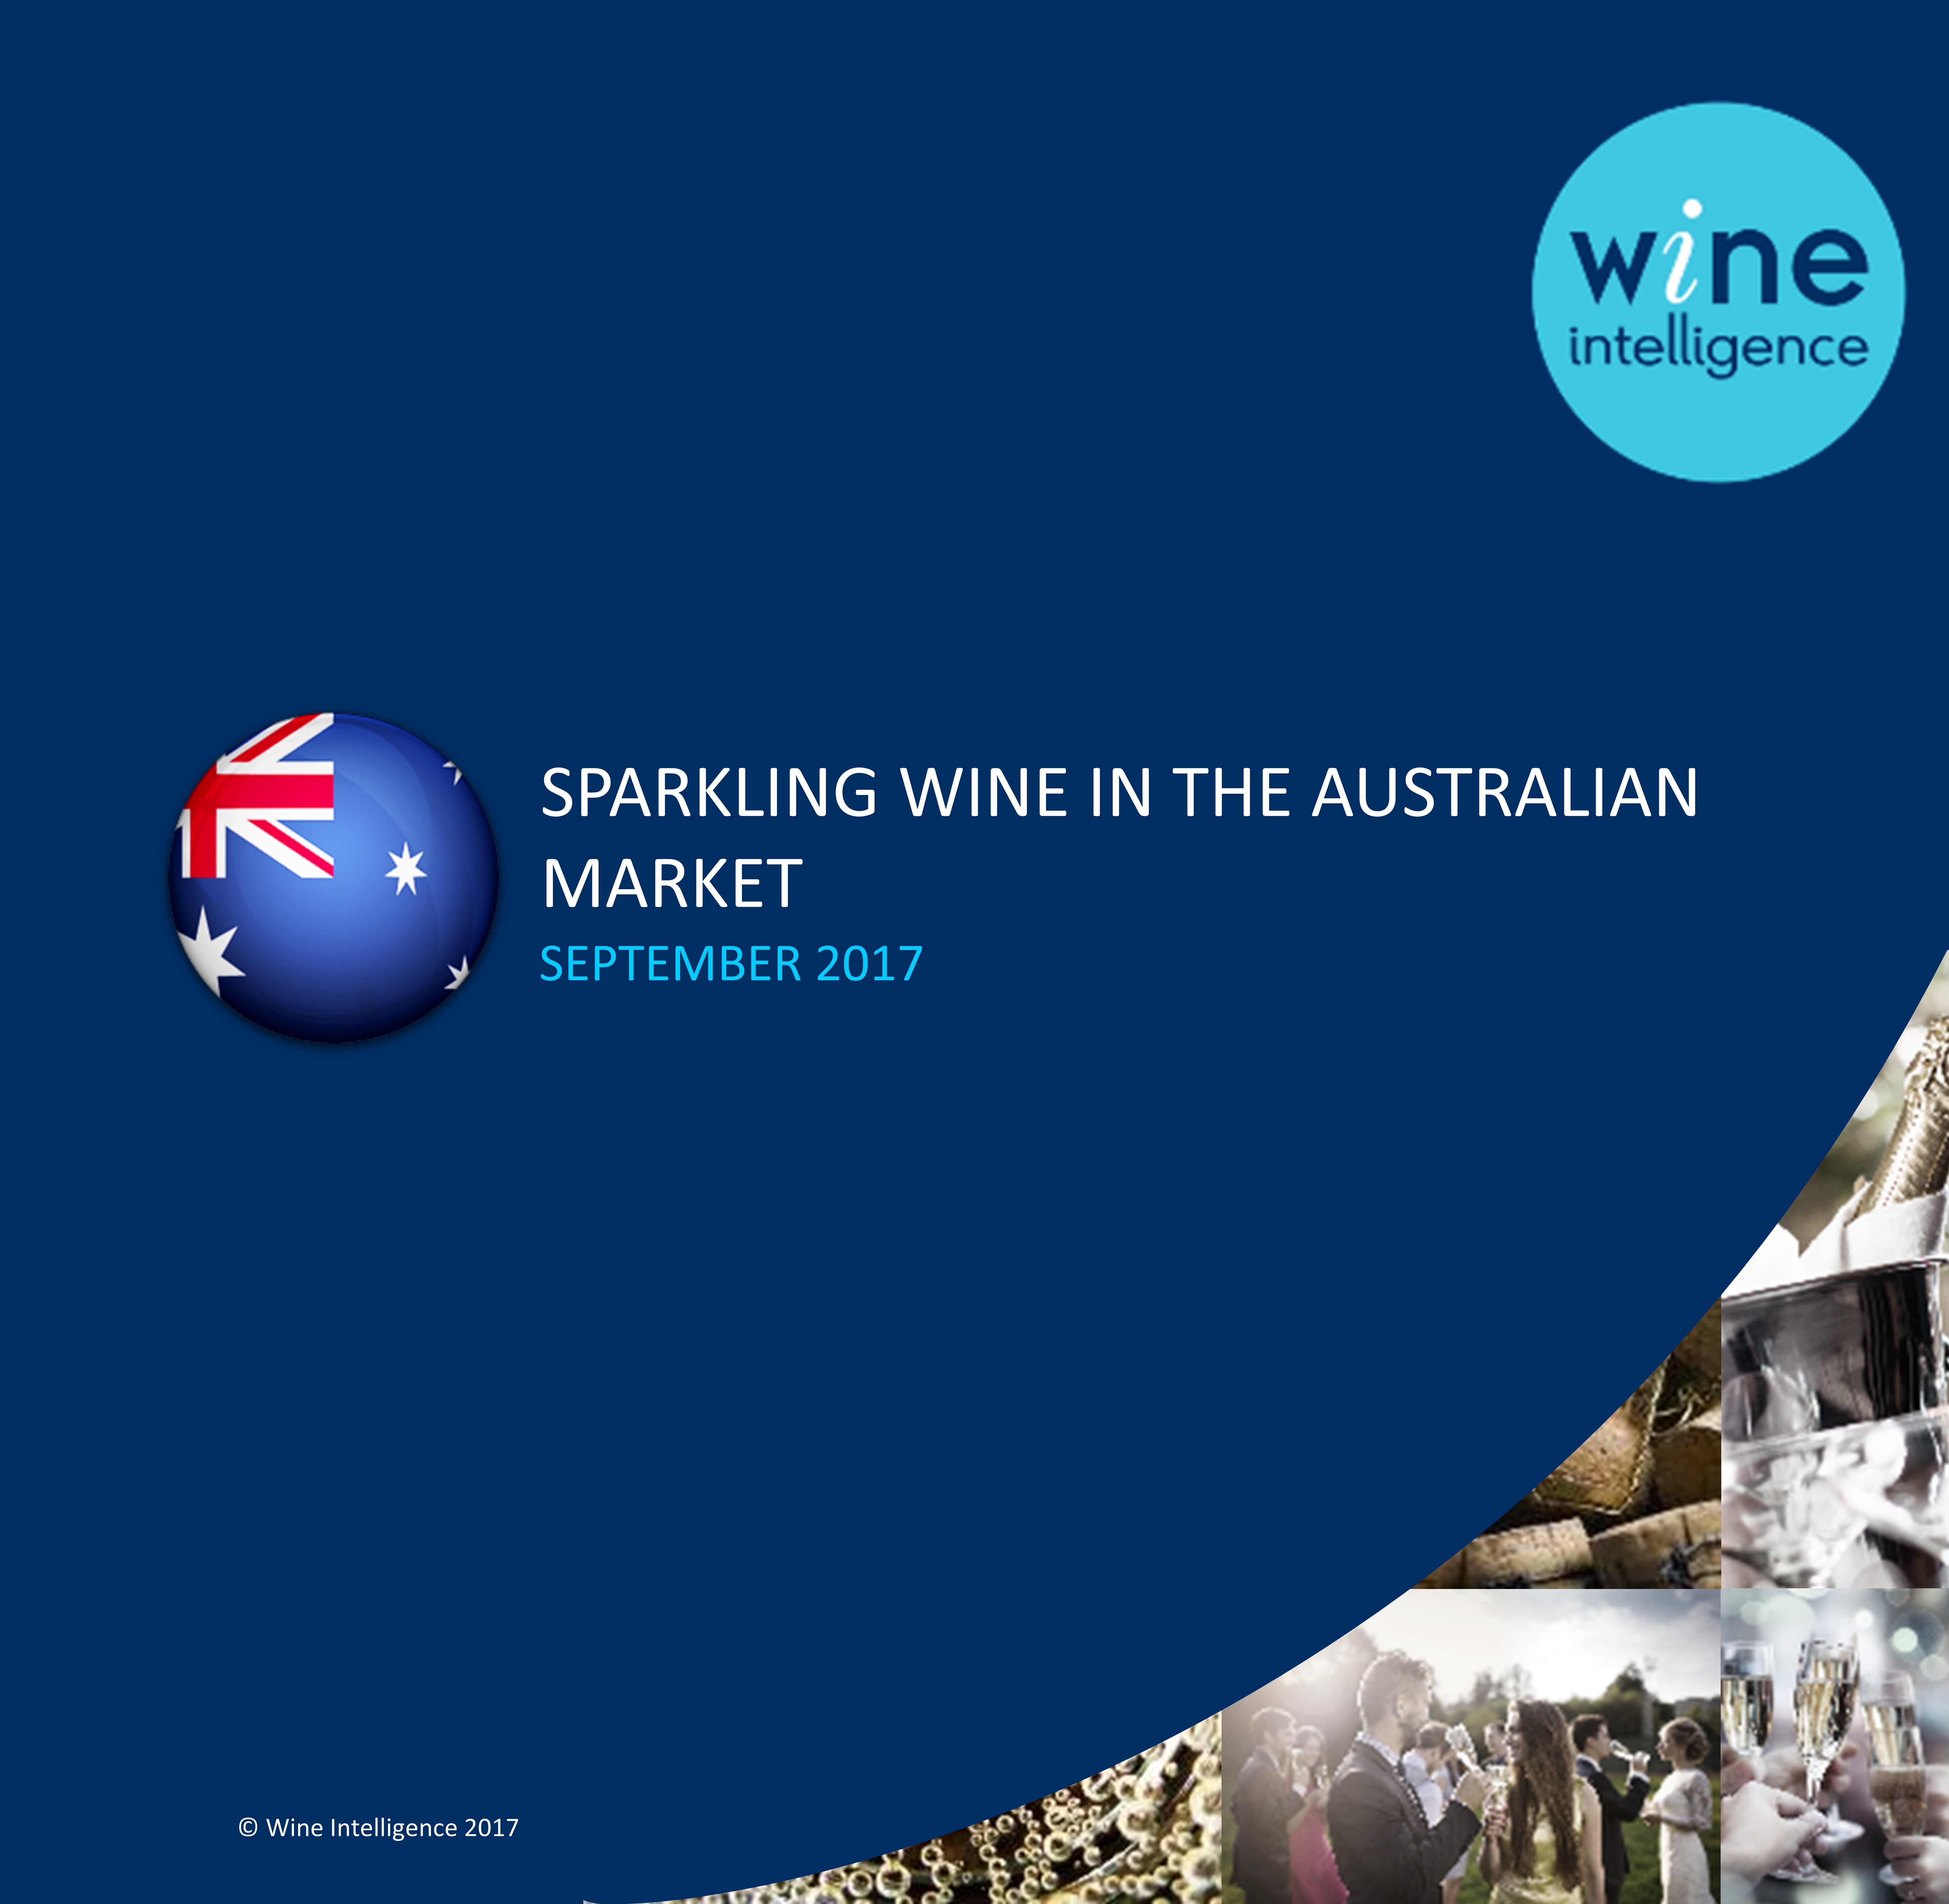 Sparkling wine in the Australian market 2017 - Press Release: Continued growth in the number of drinkers in Australia who are enjoying sparkling wine, according to a new Wine Intelligence report